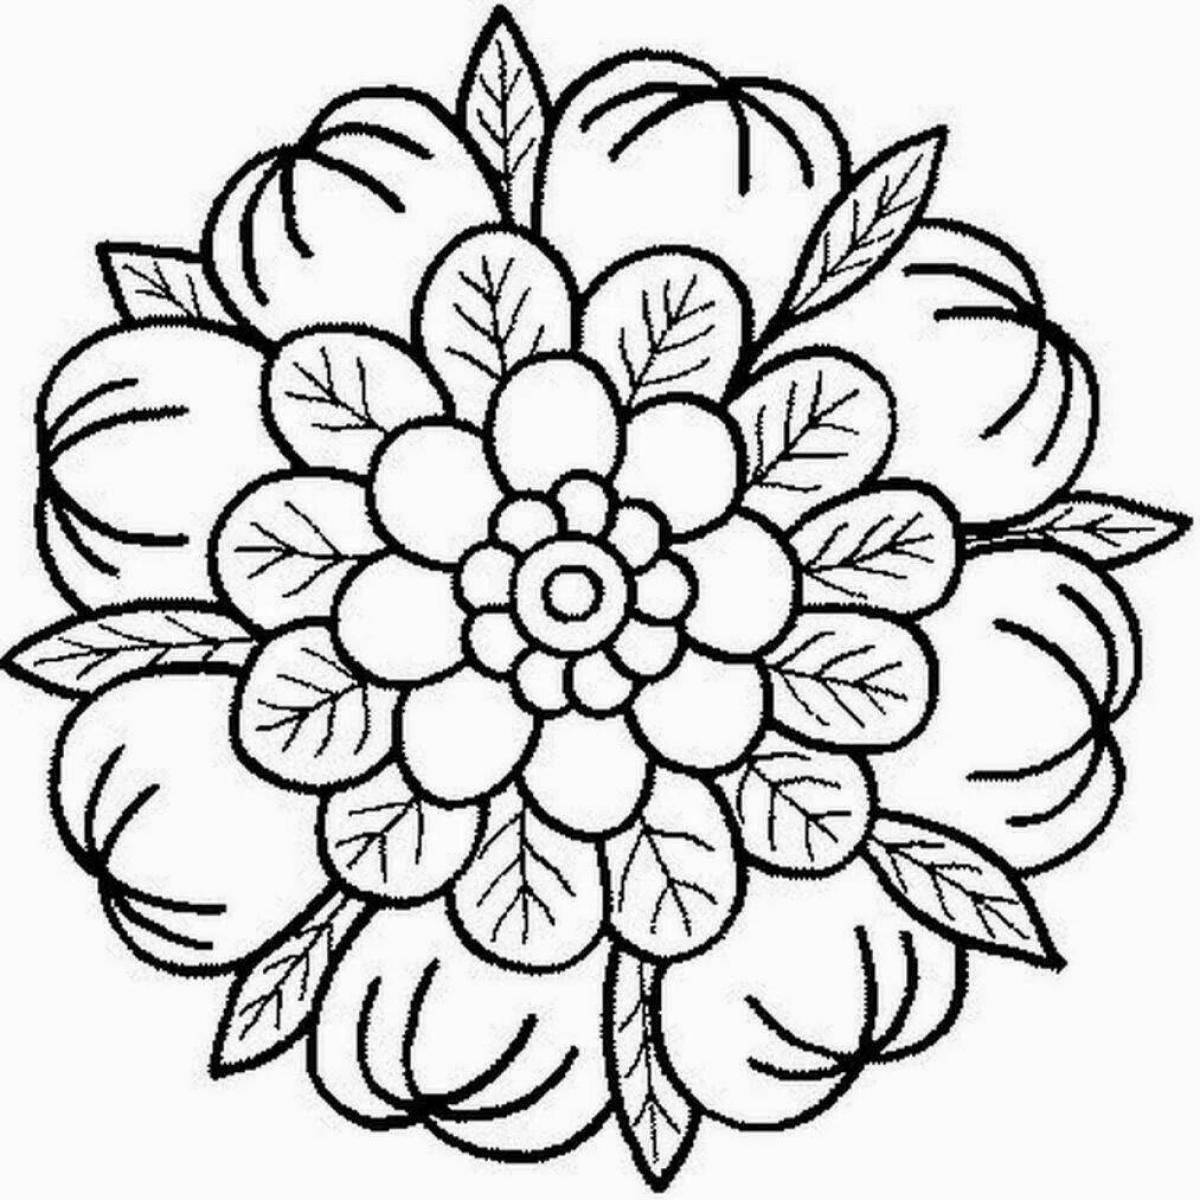 Playful coloring pages with patterns and ornaments